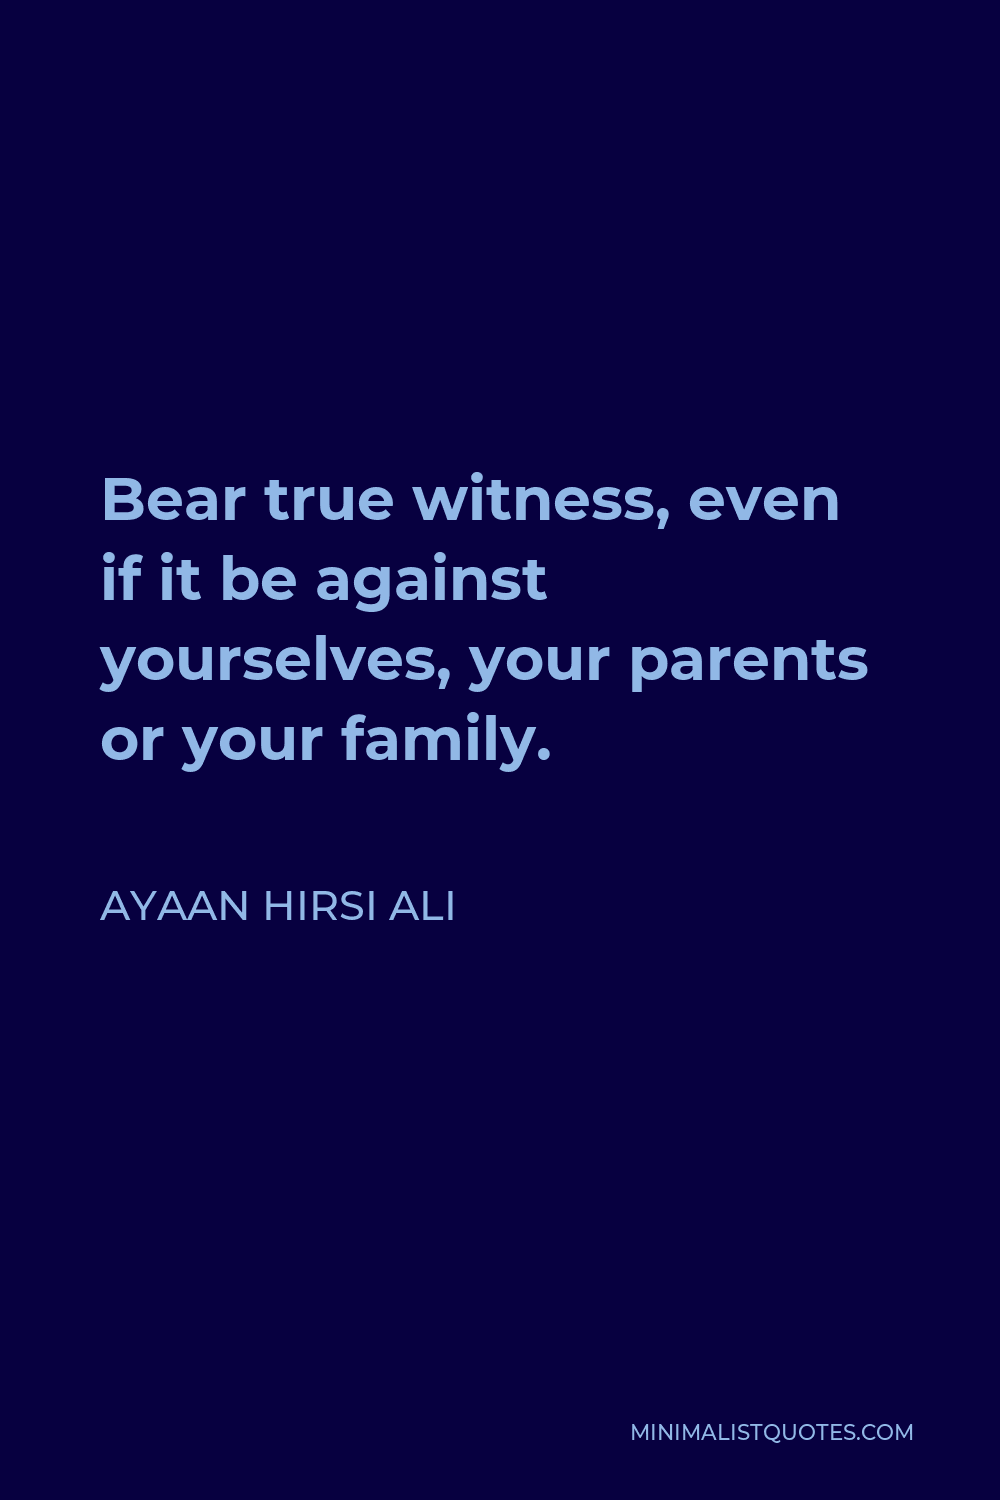 Ayaan Hirsi Ali Quote - Bear true witness, even if it be against yourselves, your parents or your family.